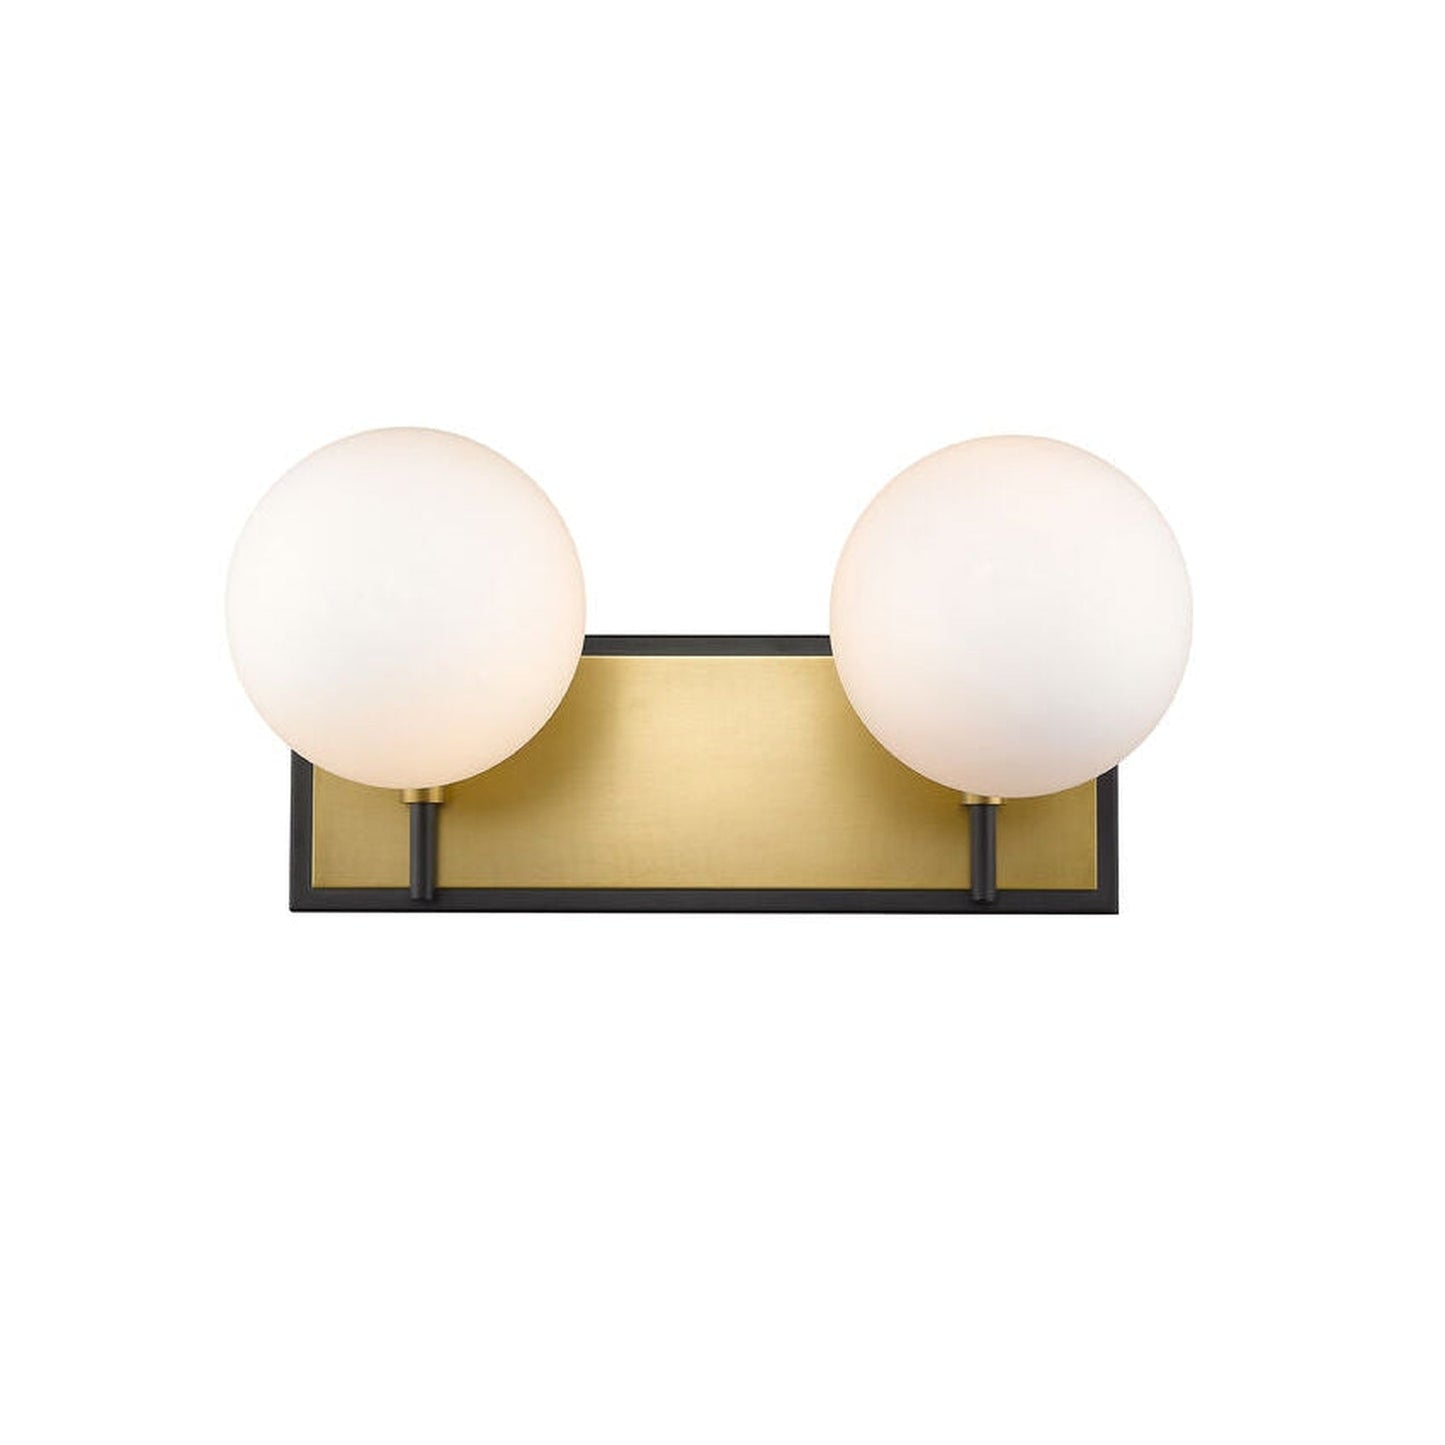 Z-Lite Parsons 16" 2-Light Matte Black and Olde Brass Vanity Light With Opal Glass Shade